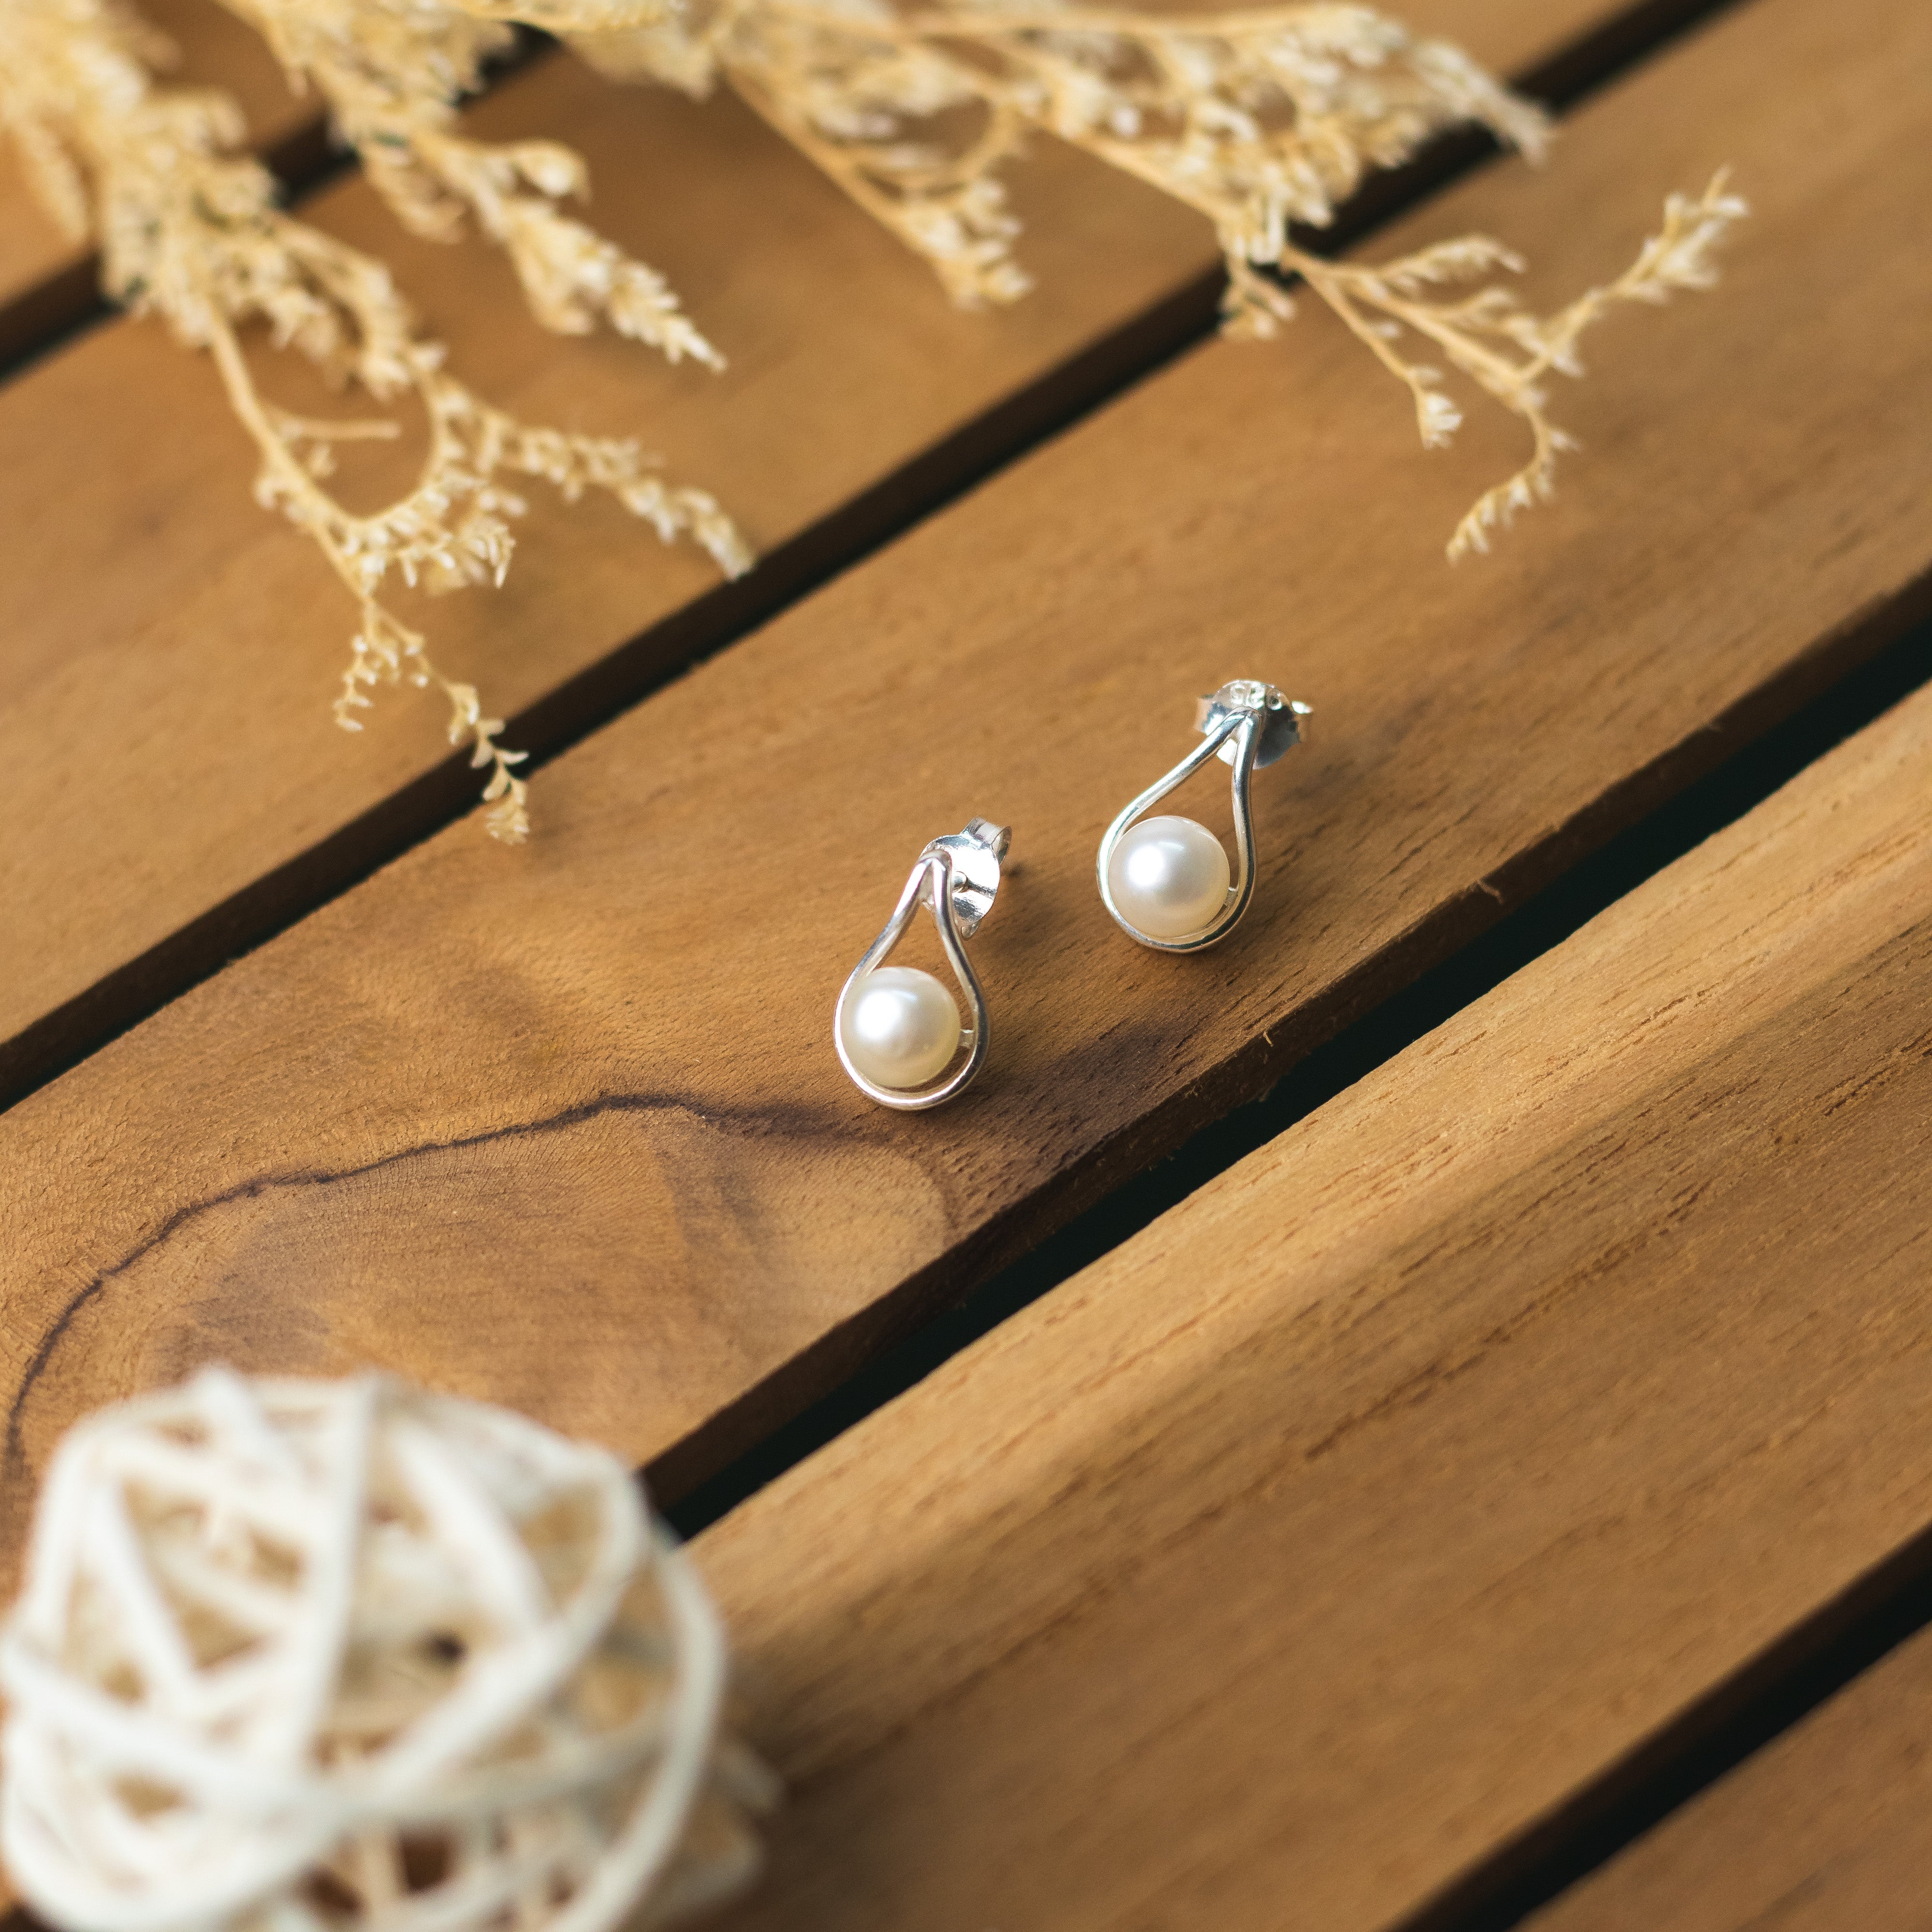 Details more than 65 sterling pearl earrings latest